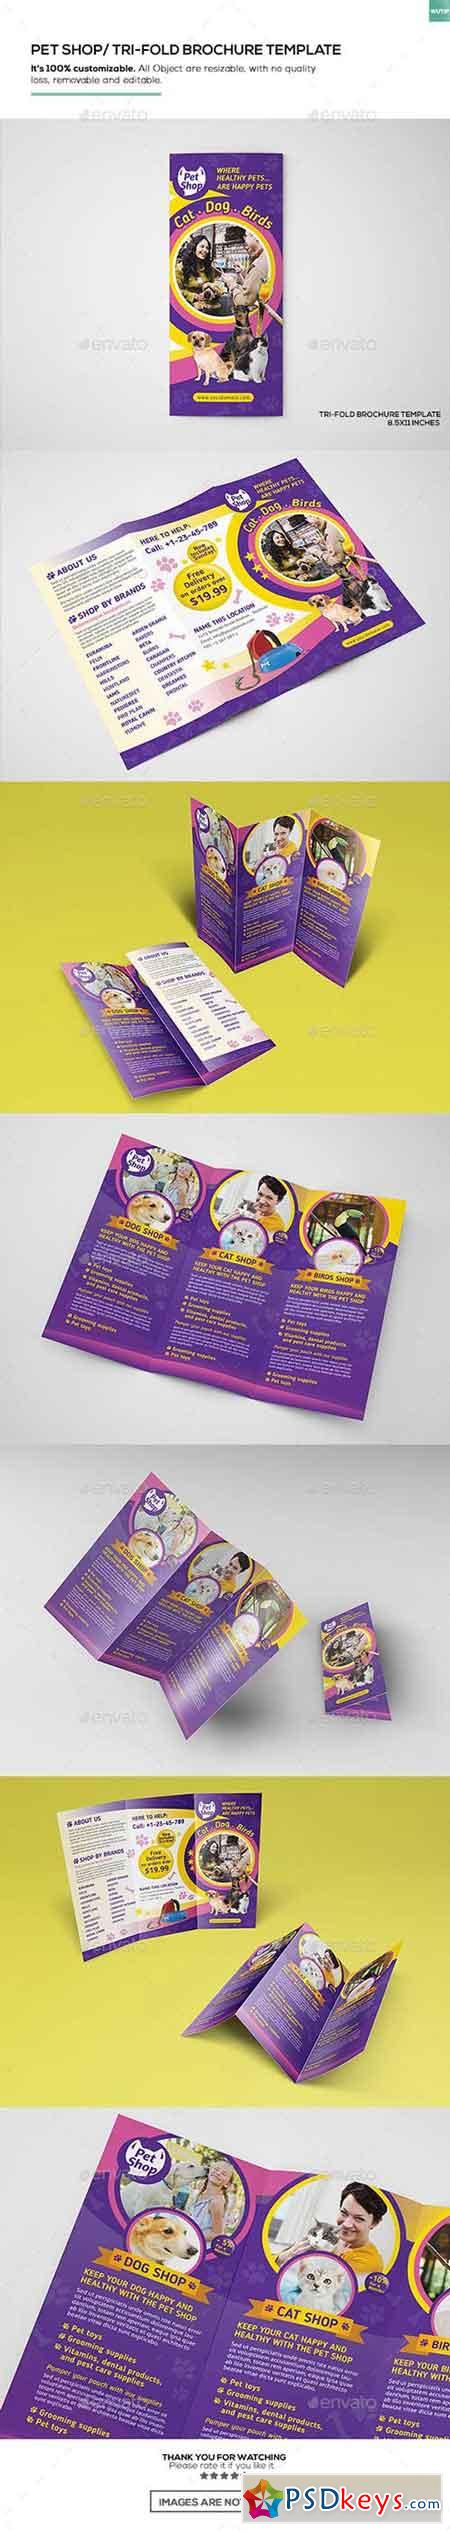 Pet Store Trifold Brochure Template 16893996